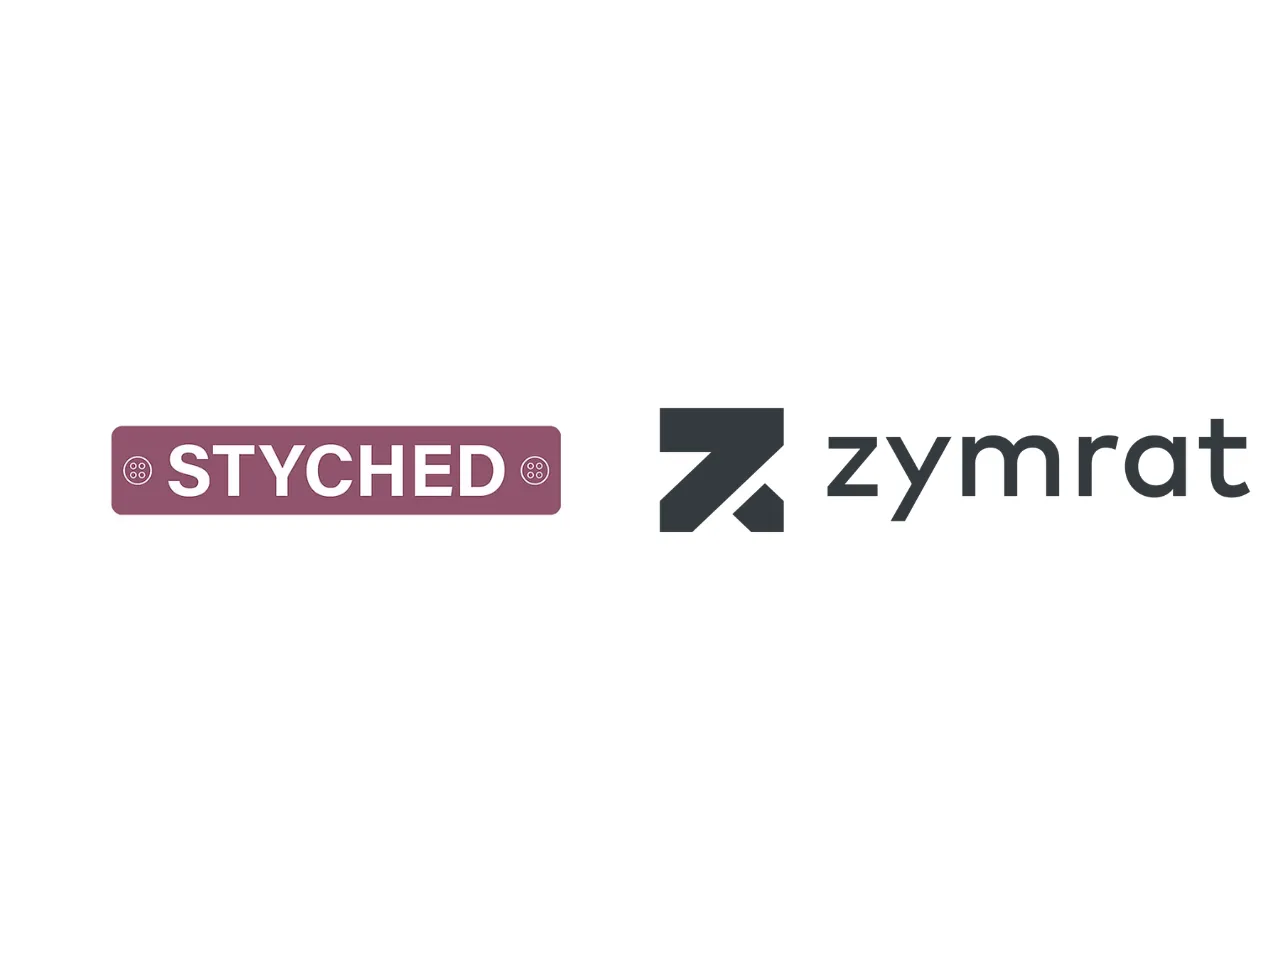 Styched acquires Zymrat